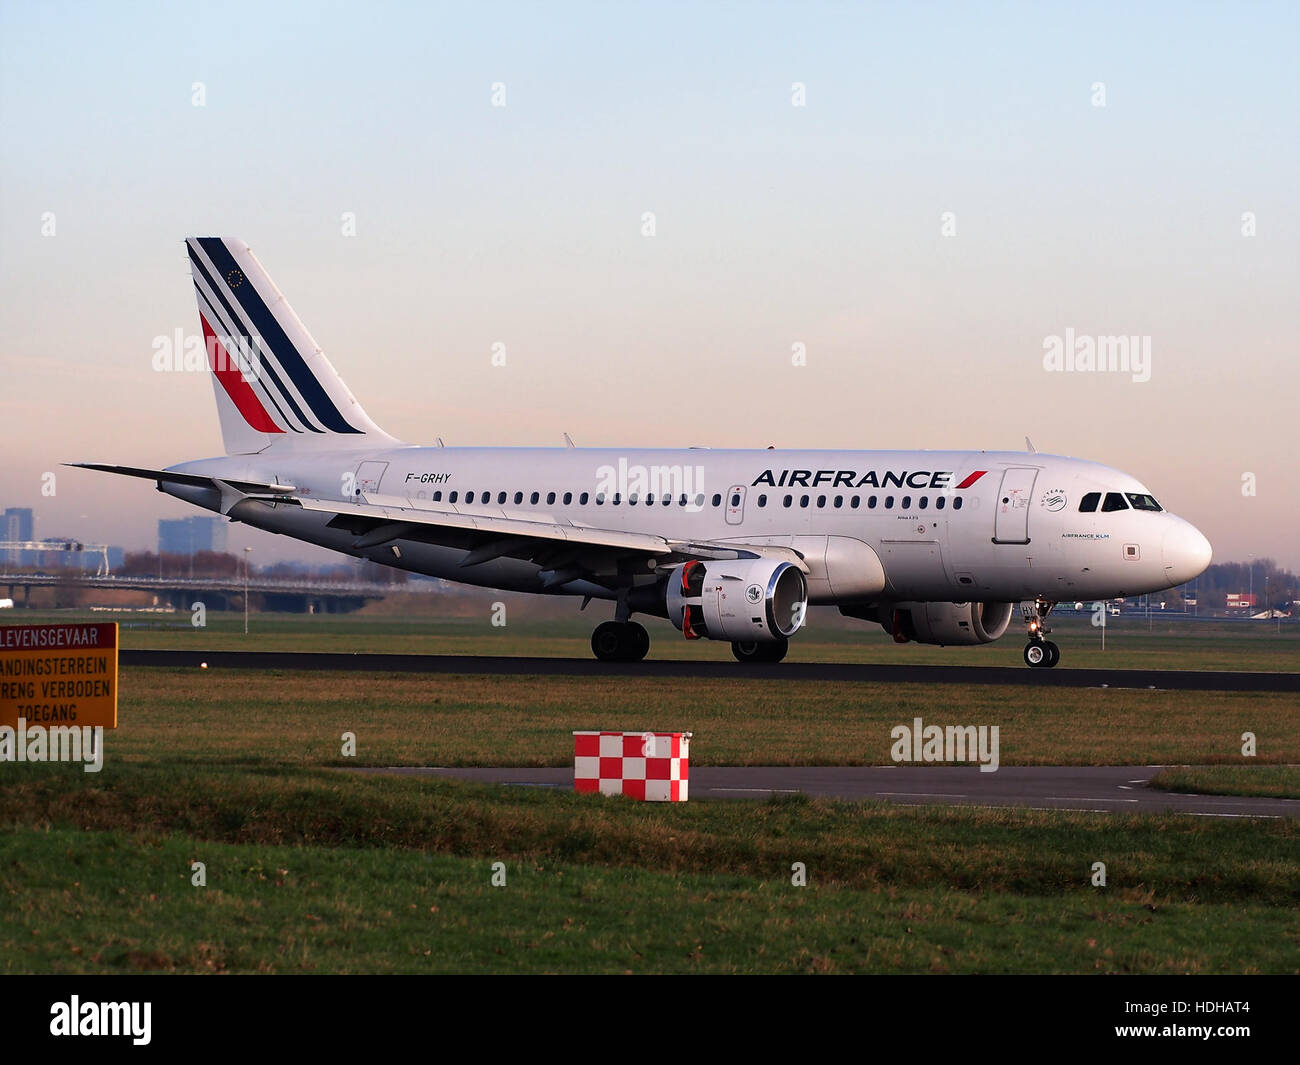 F-GRHY Airbus A319-111 (Cn 1616) Air France am Schiphol pic1 Stockfoto